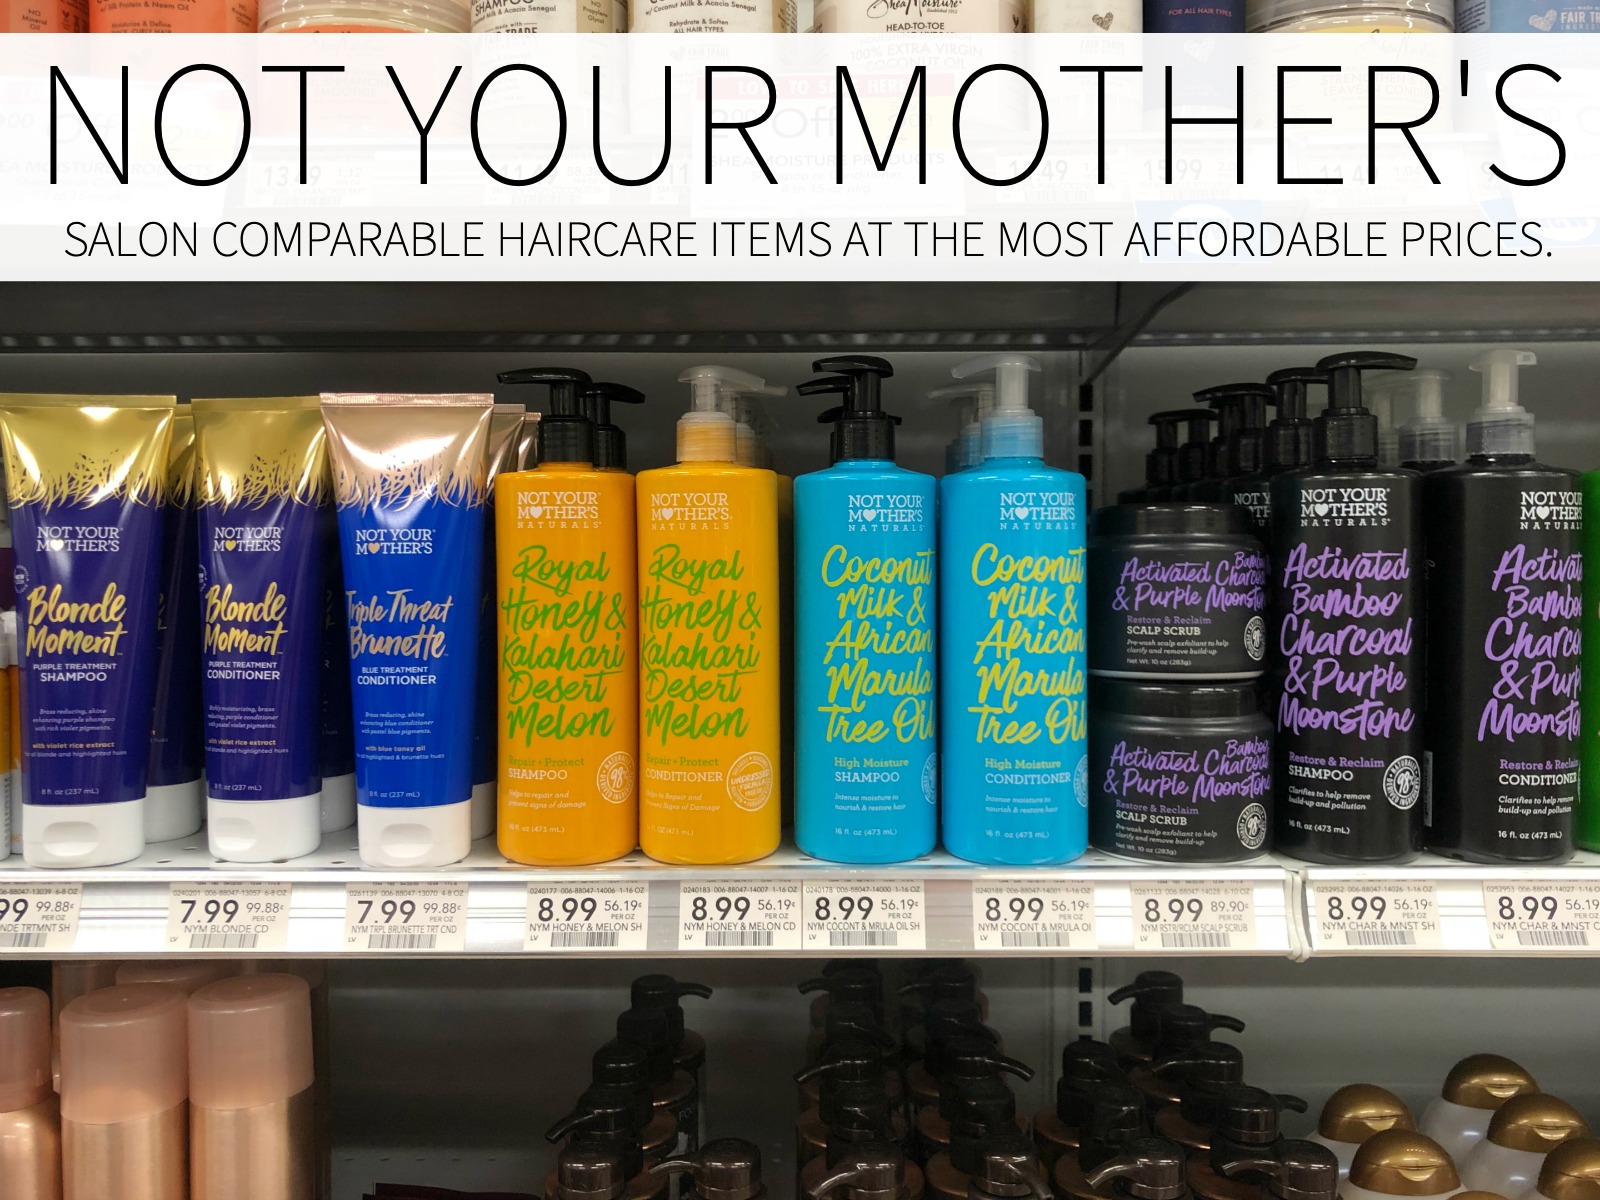 Get Salon Quality Products At Affordable Prices With Not Your Mother’s Haircare – Available At Your Local Publix